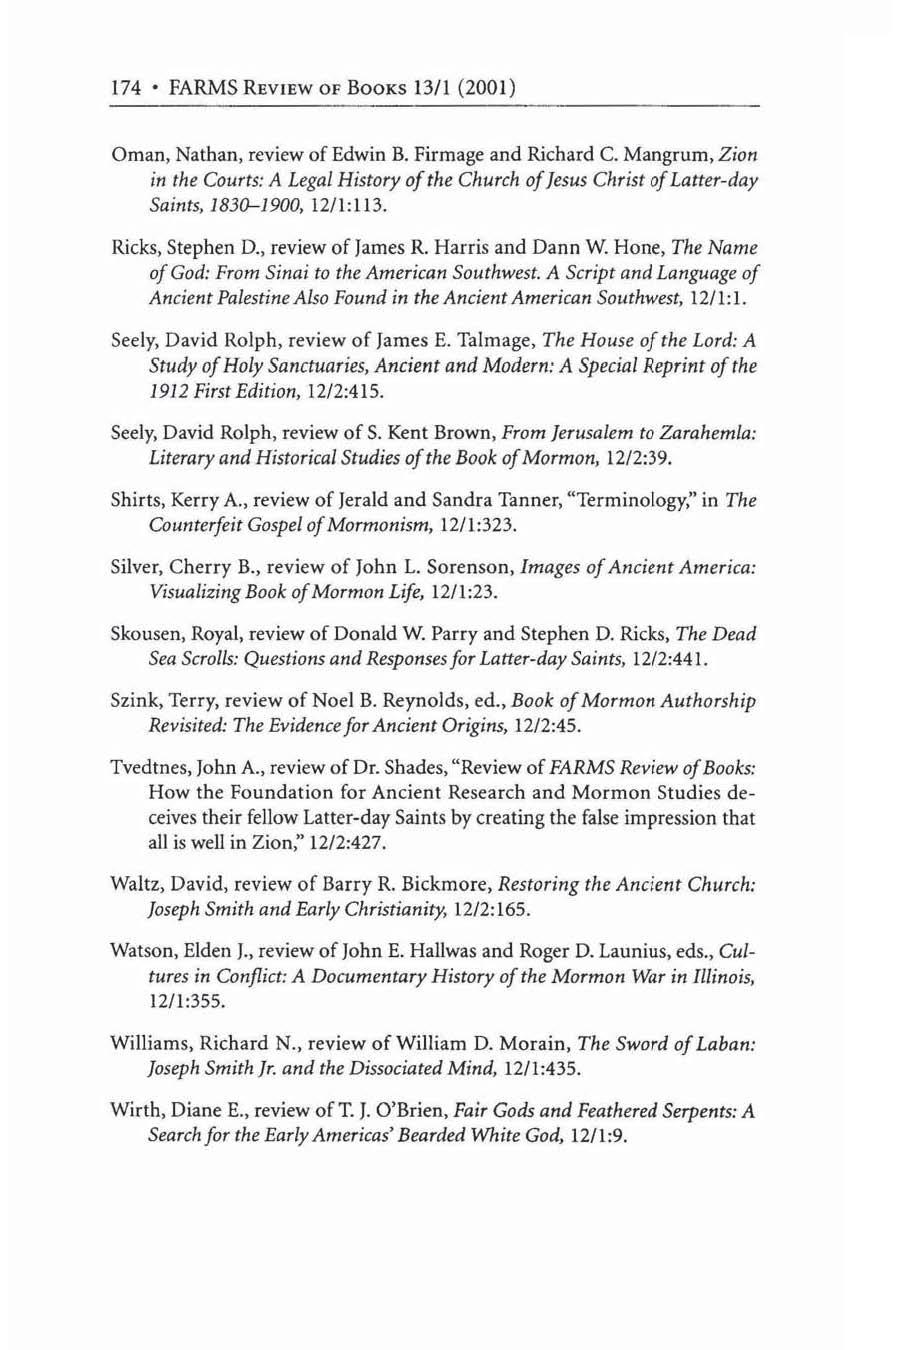 174 FARMS REVIEW OF BOOKS 13/1 (2001) Oman, Nathan, review of Edwin B. Firmage and Richard C.